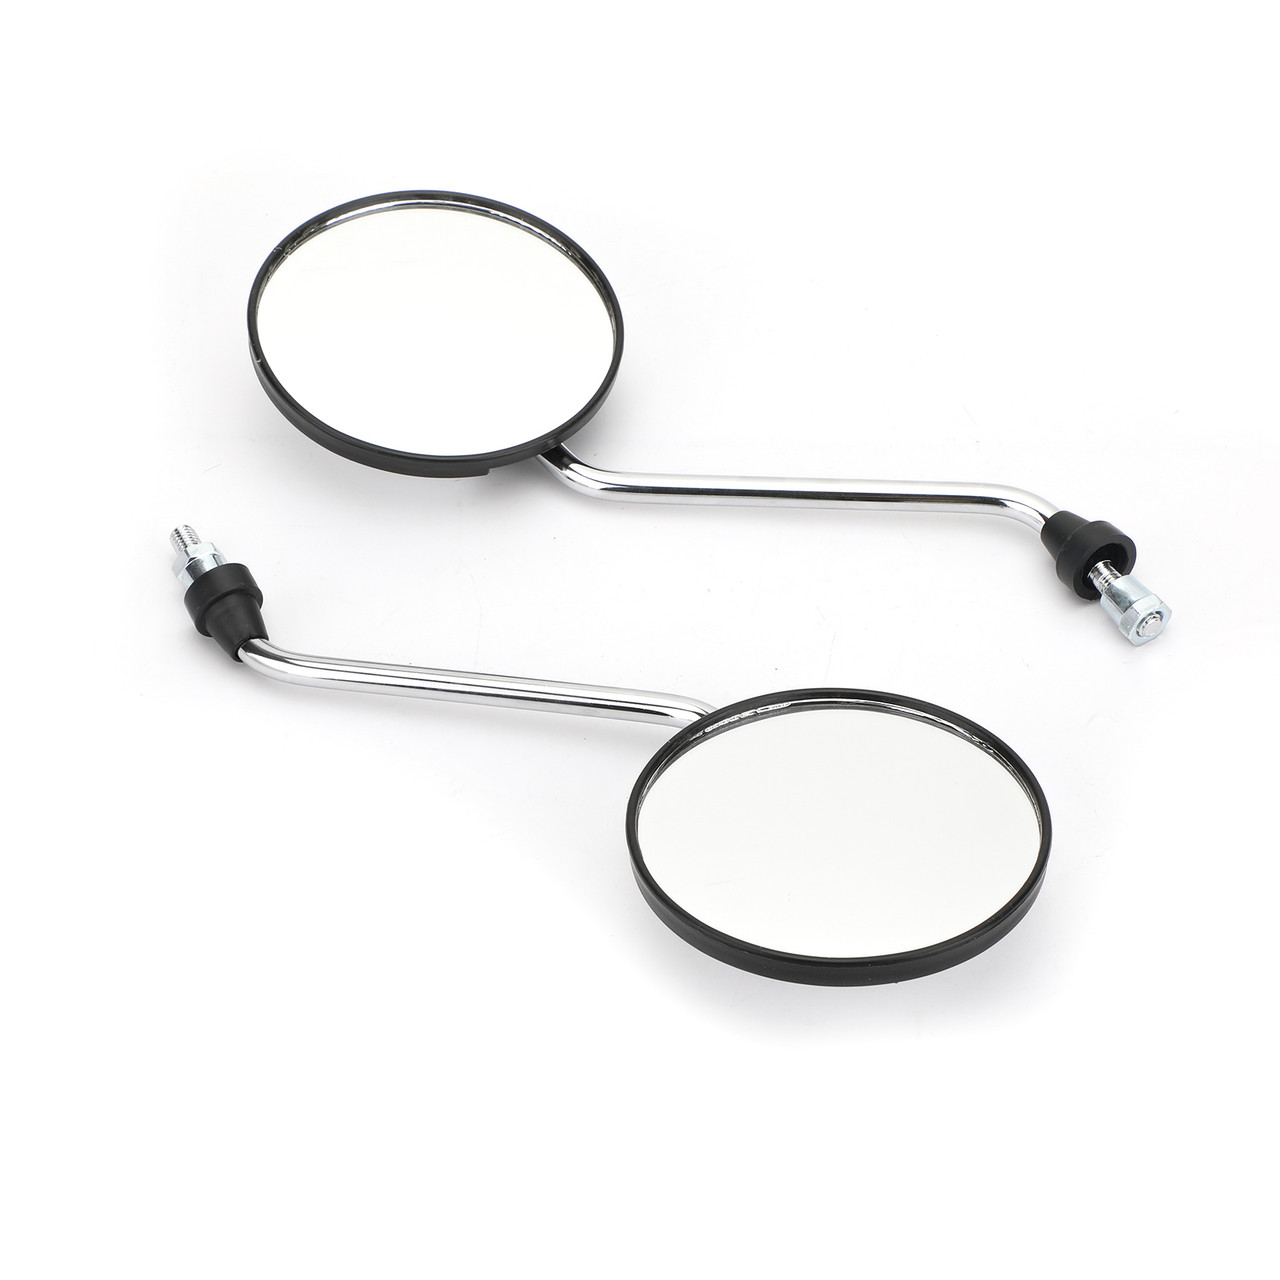 Pair 8mm Rearview Mirrors fits for Suzuki Scooter Motorcycle Moped Bike ATV with 8MM threads White~BC1